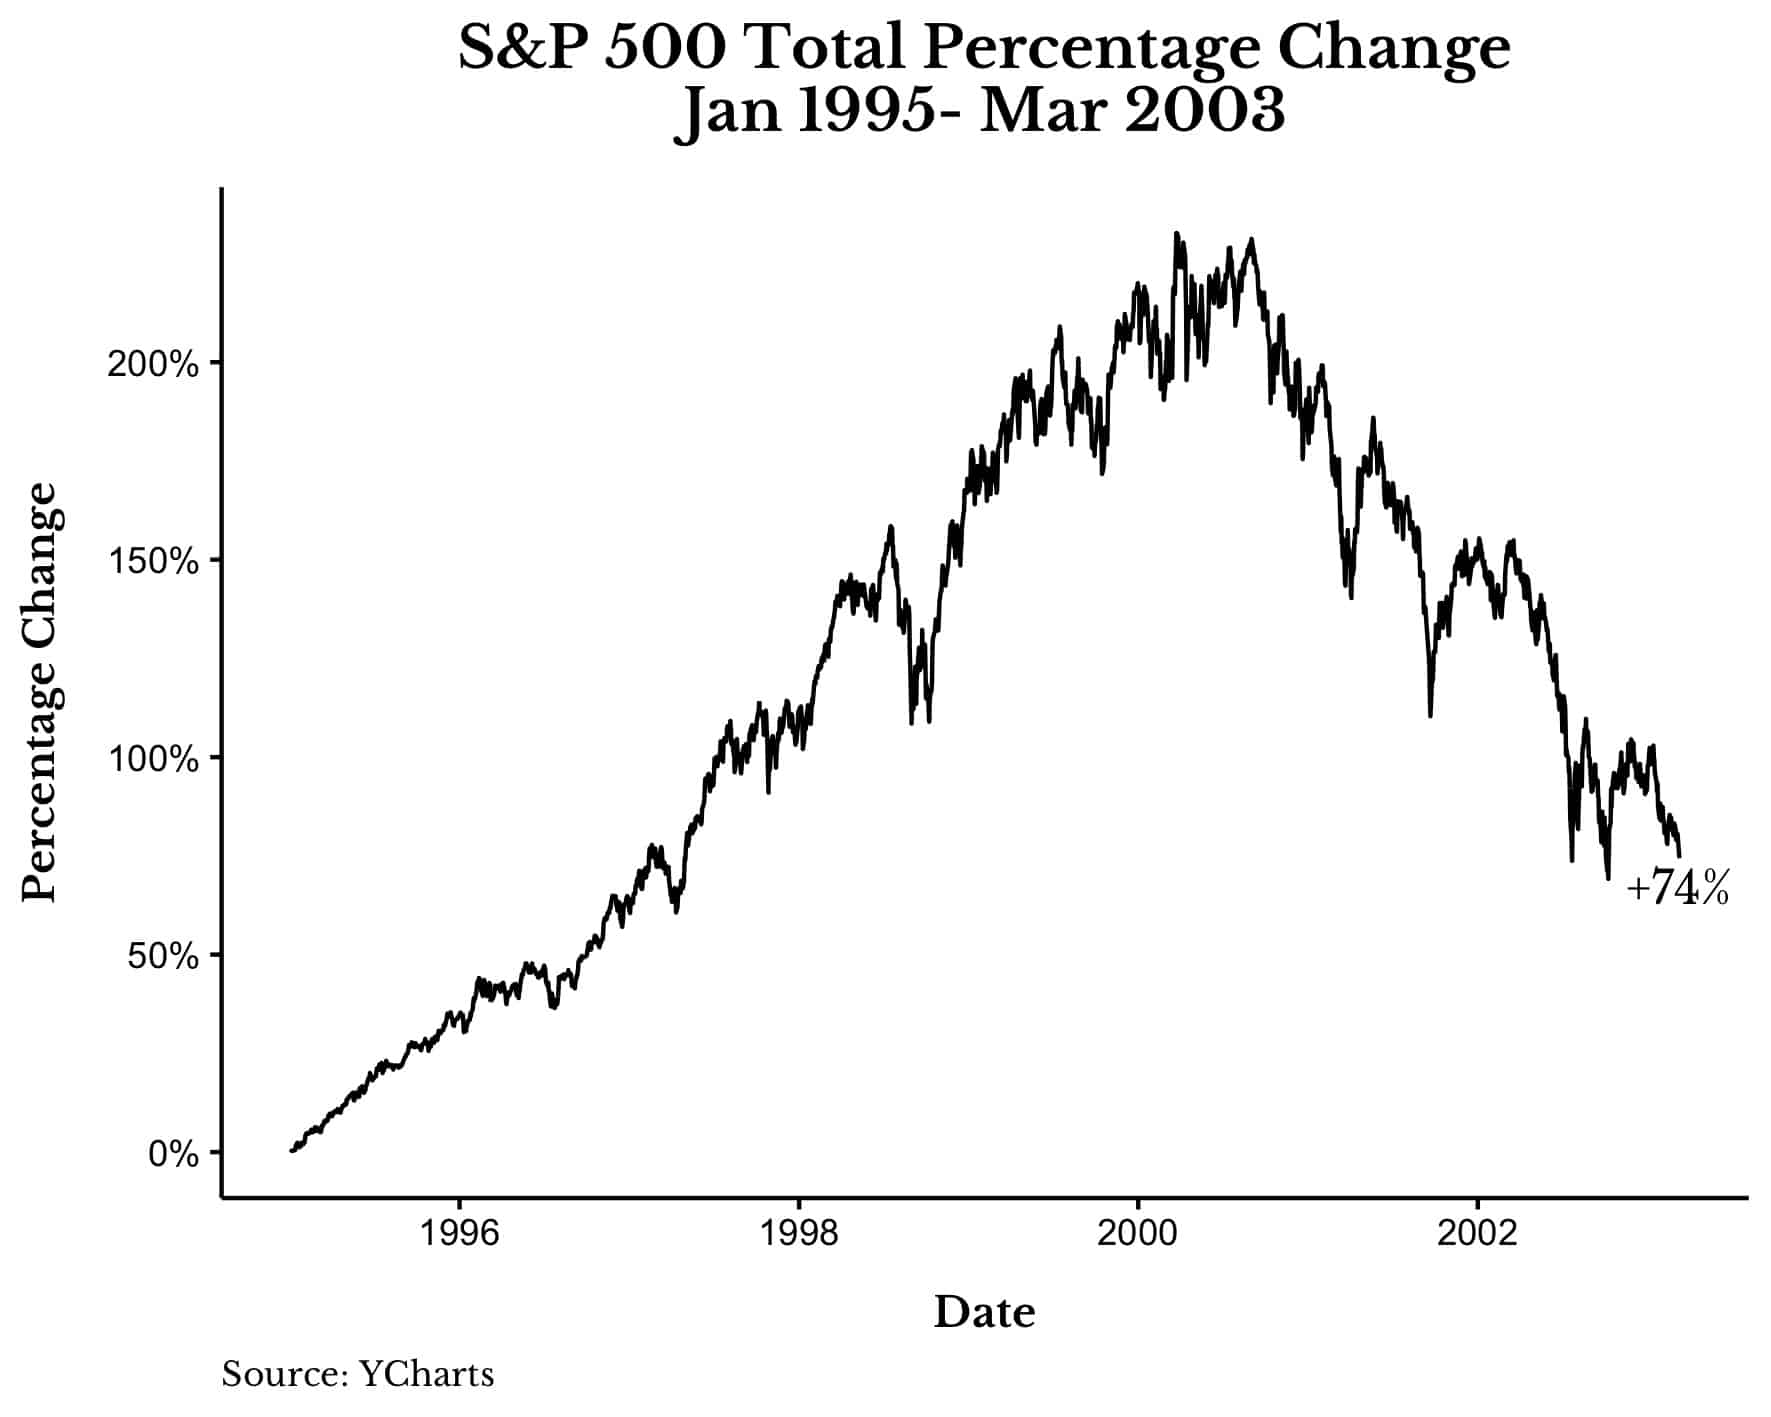 S&P 500 total percentage change from Jan 1995 to Mar 2003